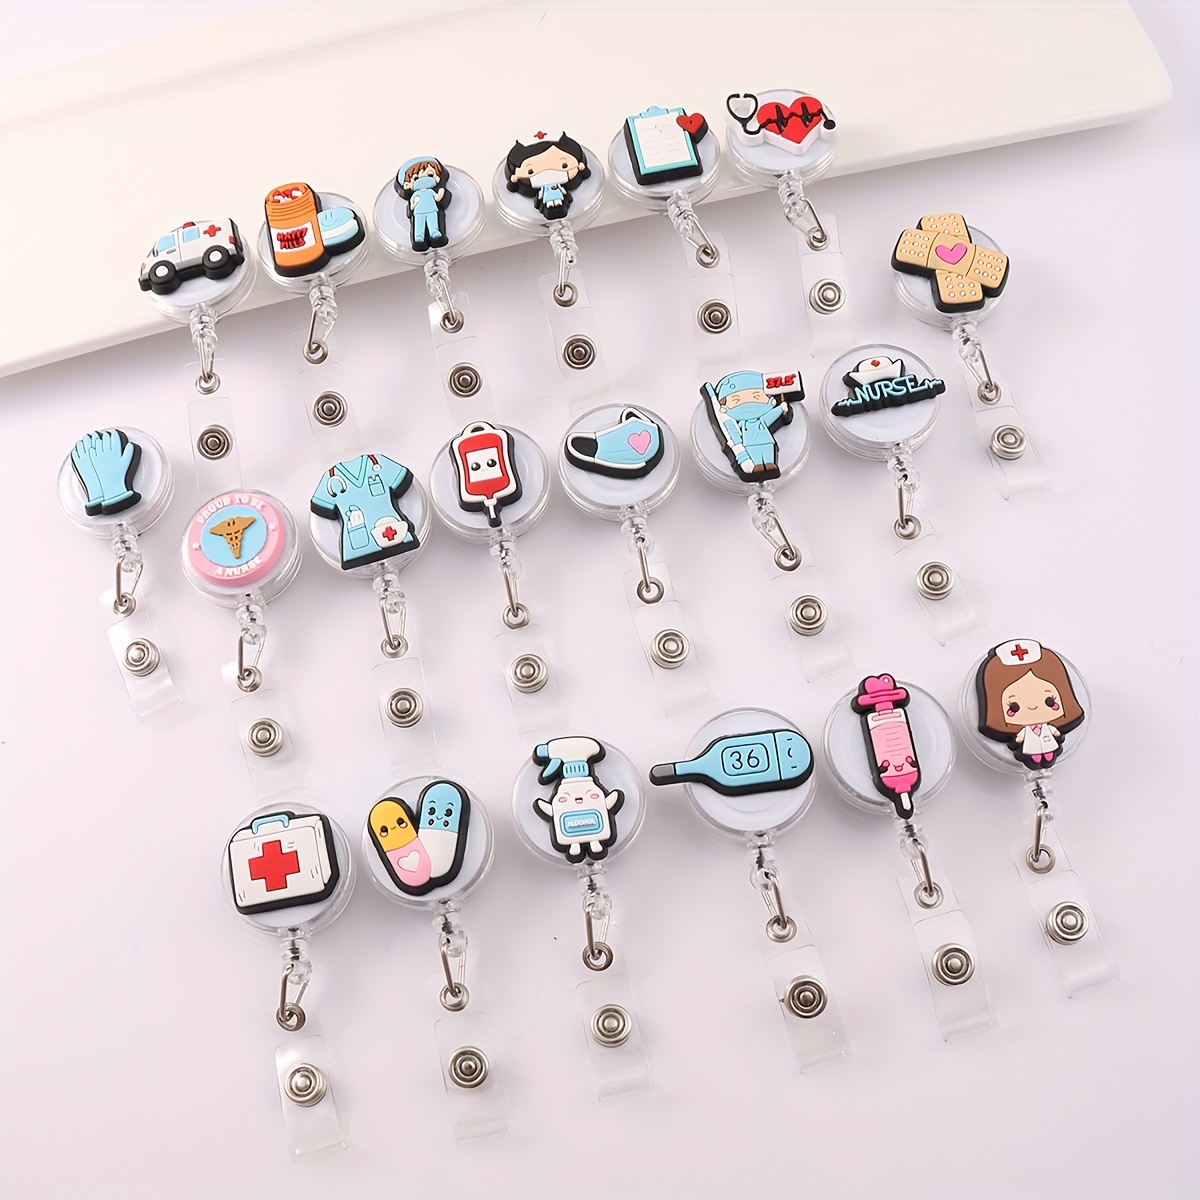 

Medical Themed Retractable Badge Reels Keychains, Nursing Id Holder Clips With Cute Cartoon Design, Durable Badge Holders For Professionals Nurses Doctors